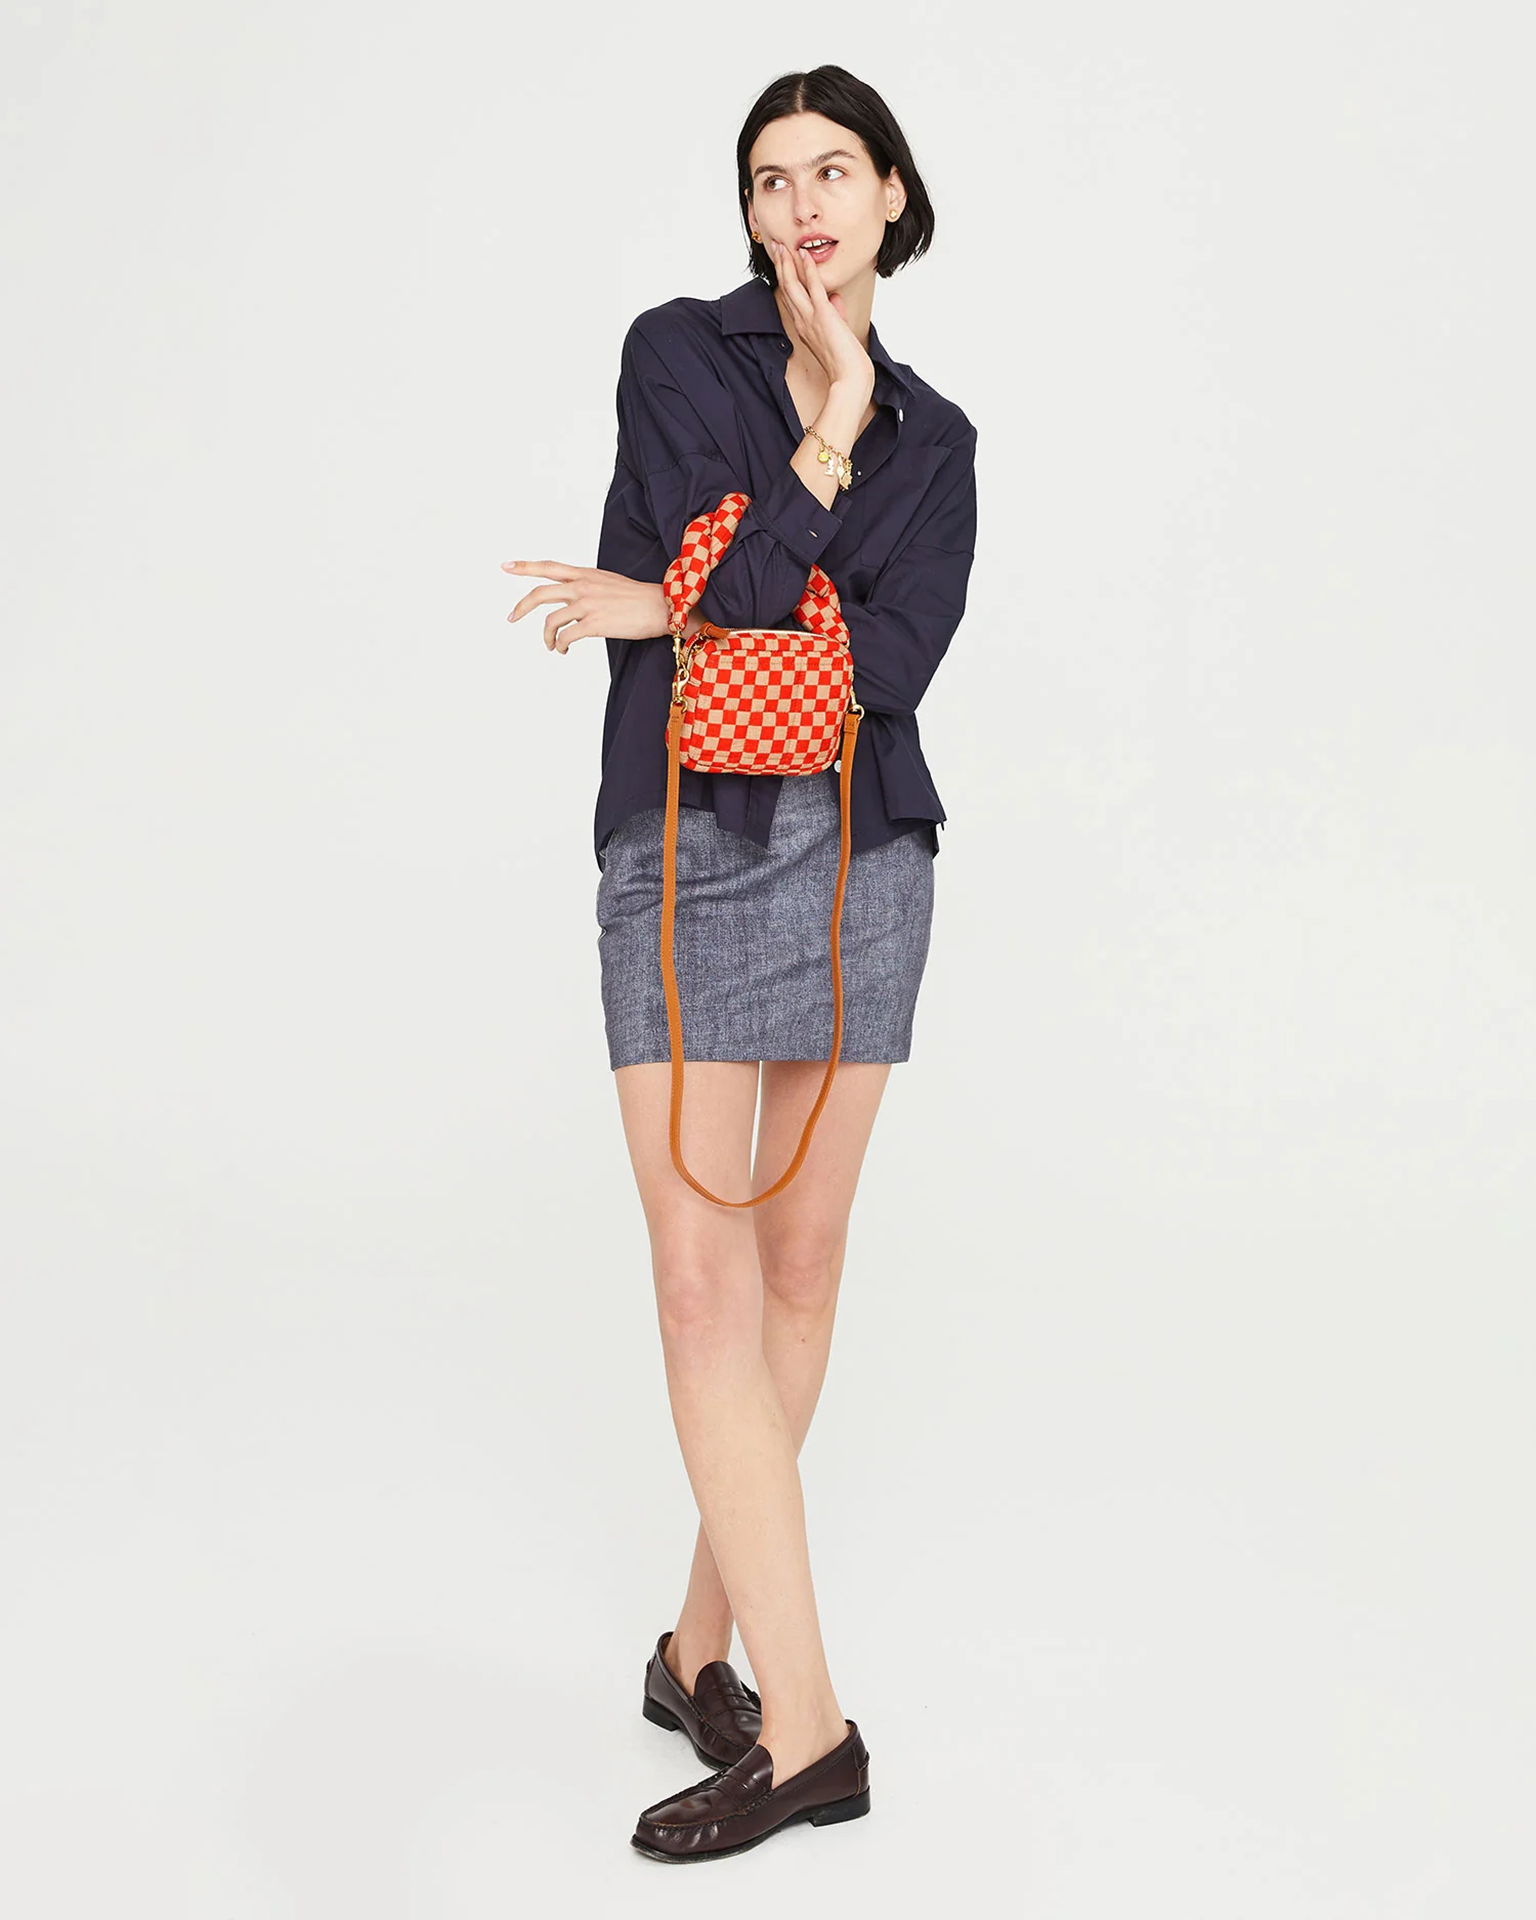 Clare V. Lucie Bag - Poppy/Khaki Quilted Checker - FINAL SALE – She She  Boutique